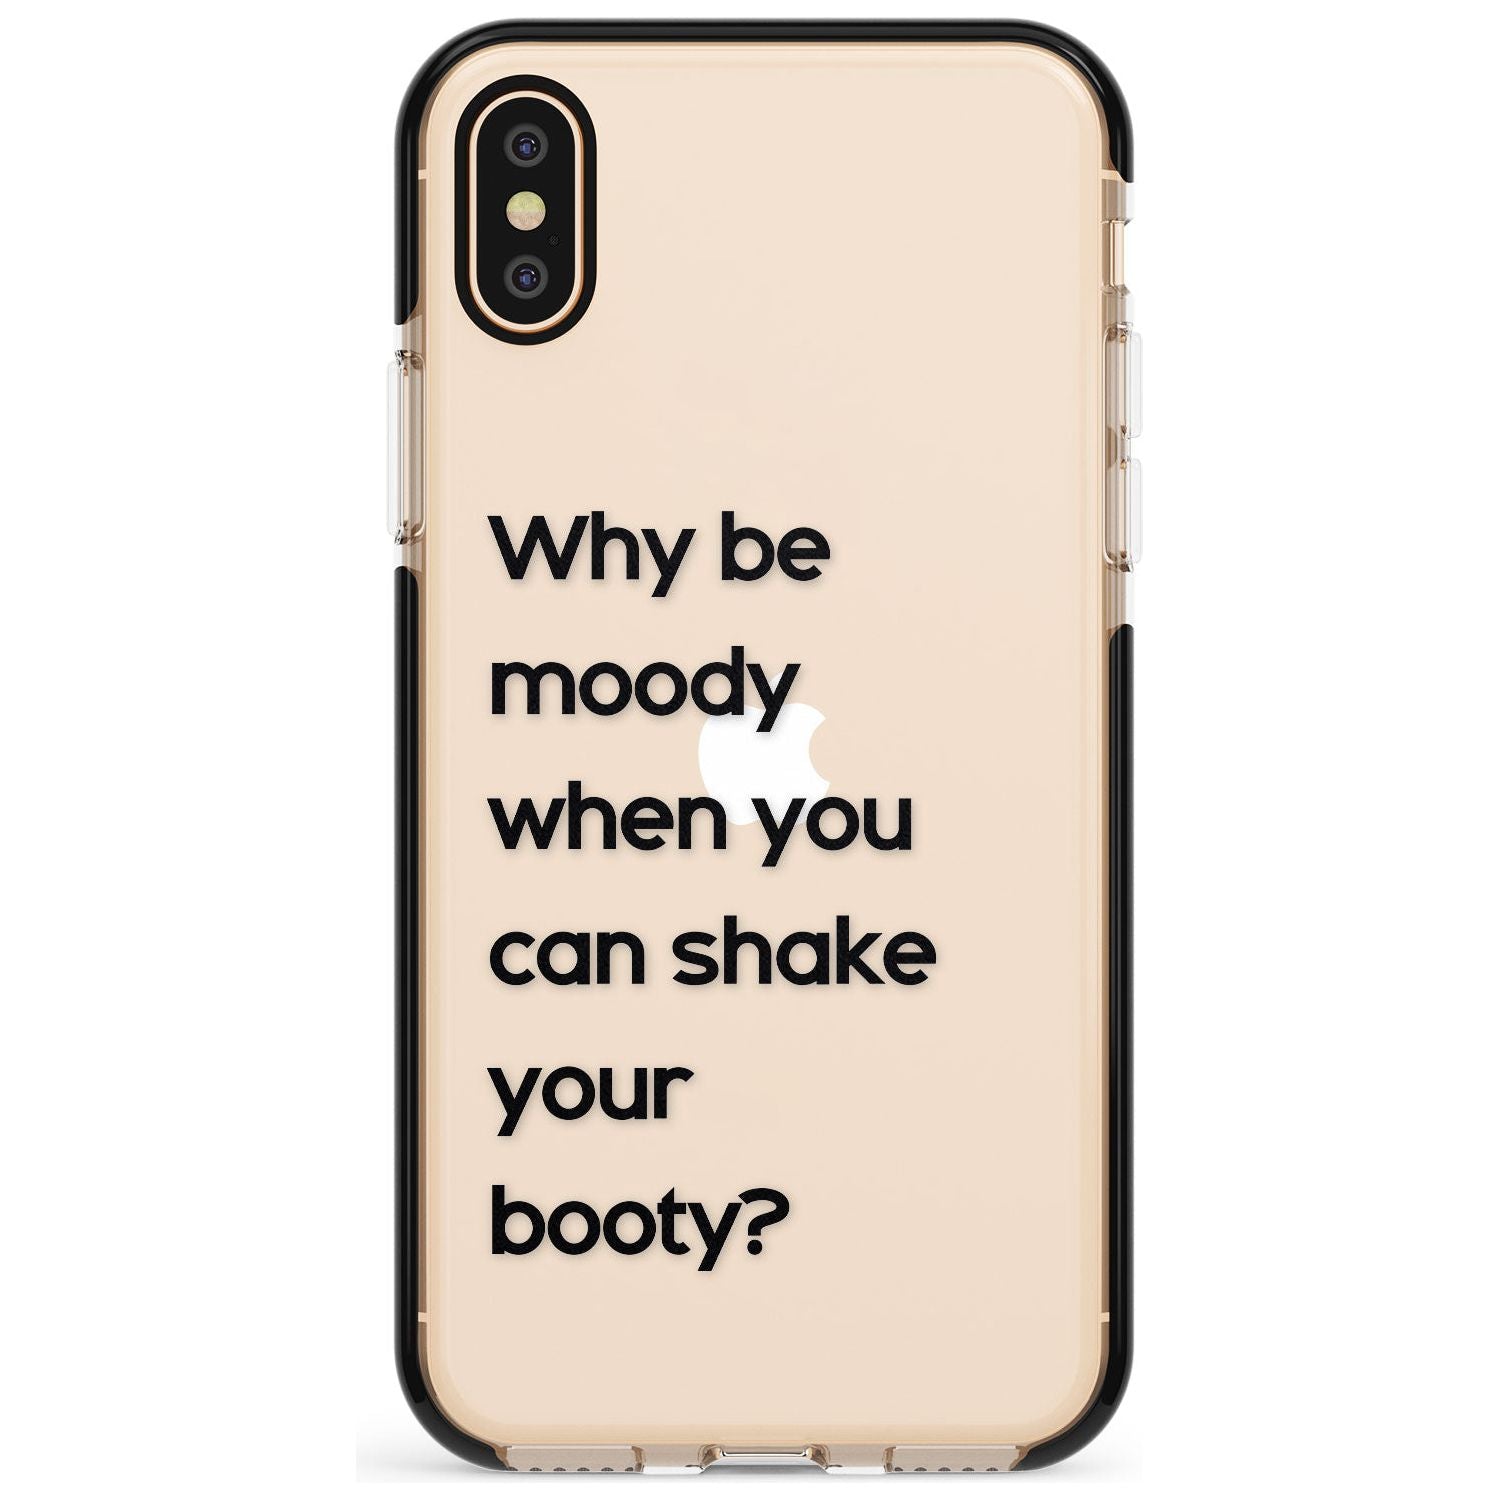 Why be moody? Pink Fade Impact Phone Case for iPhone X XS Max XR